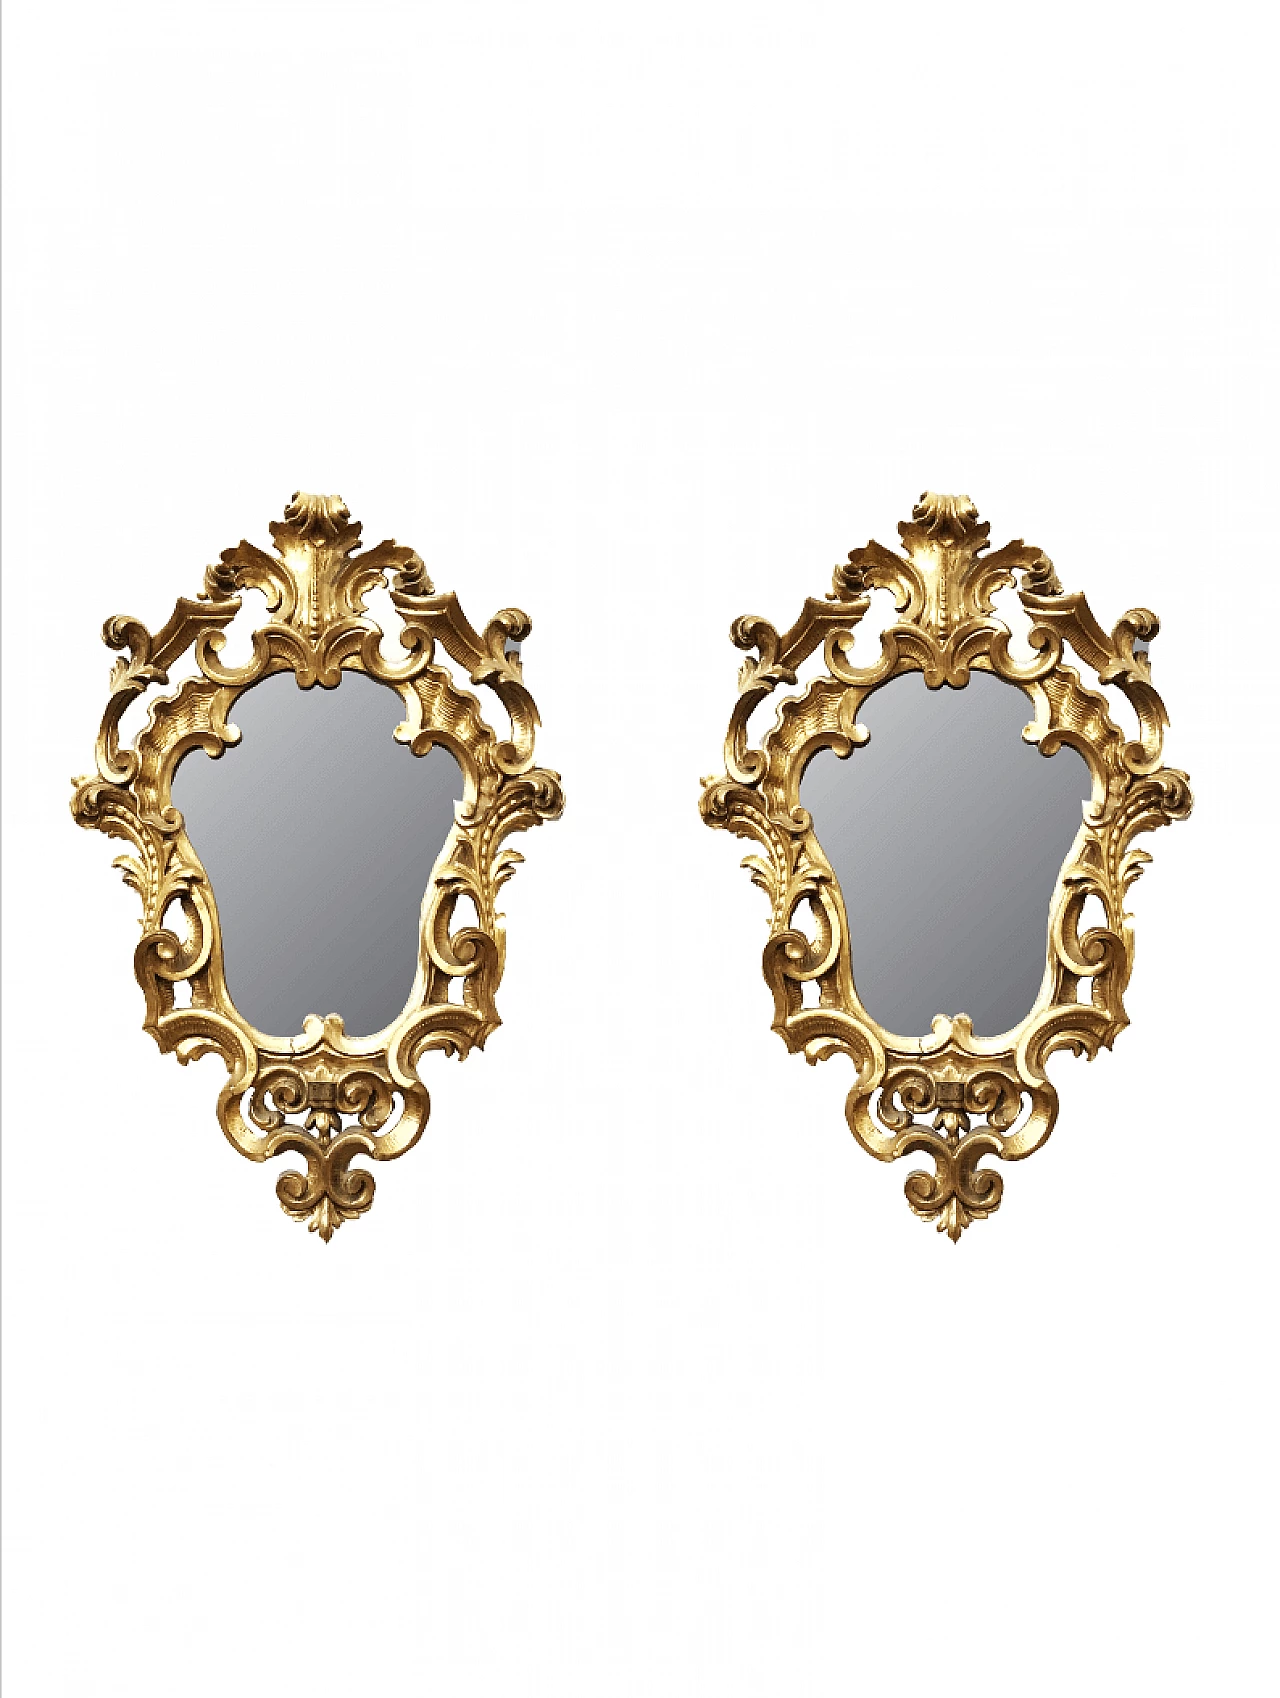 Pair of Baroque style carved gilded mirrors, Italy, early 20th century 1039020